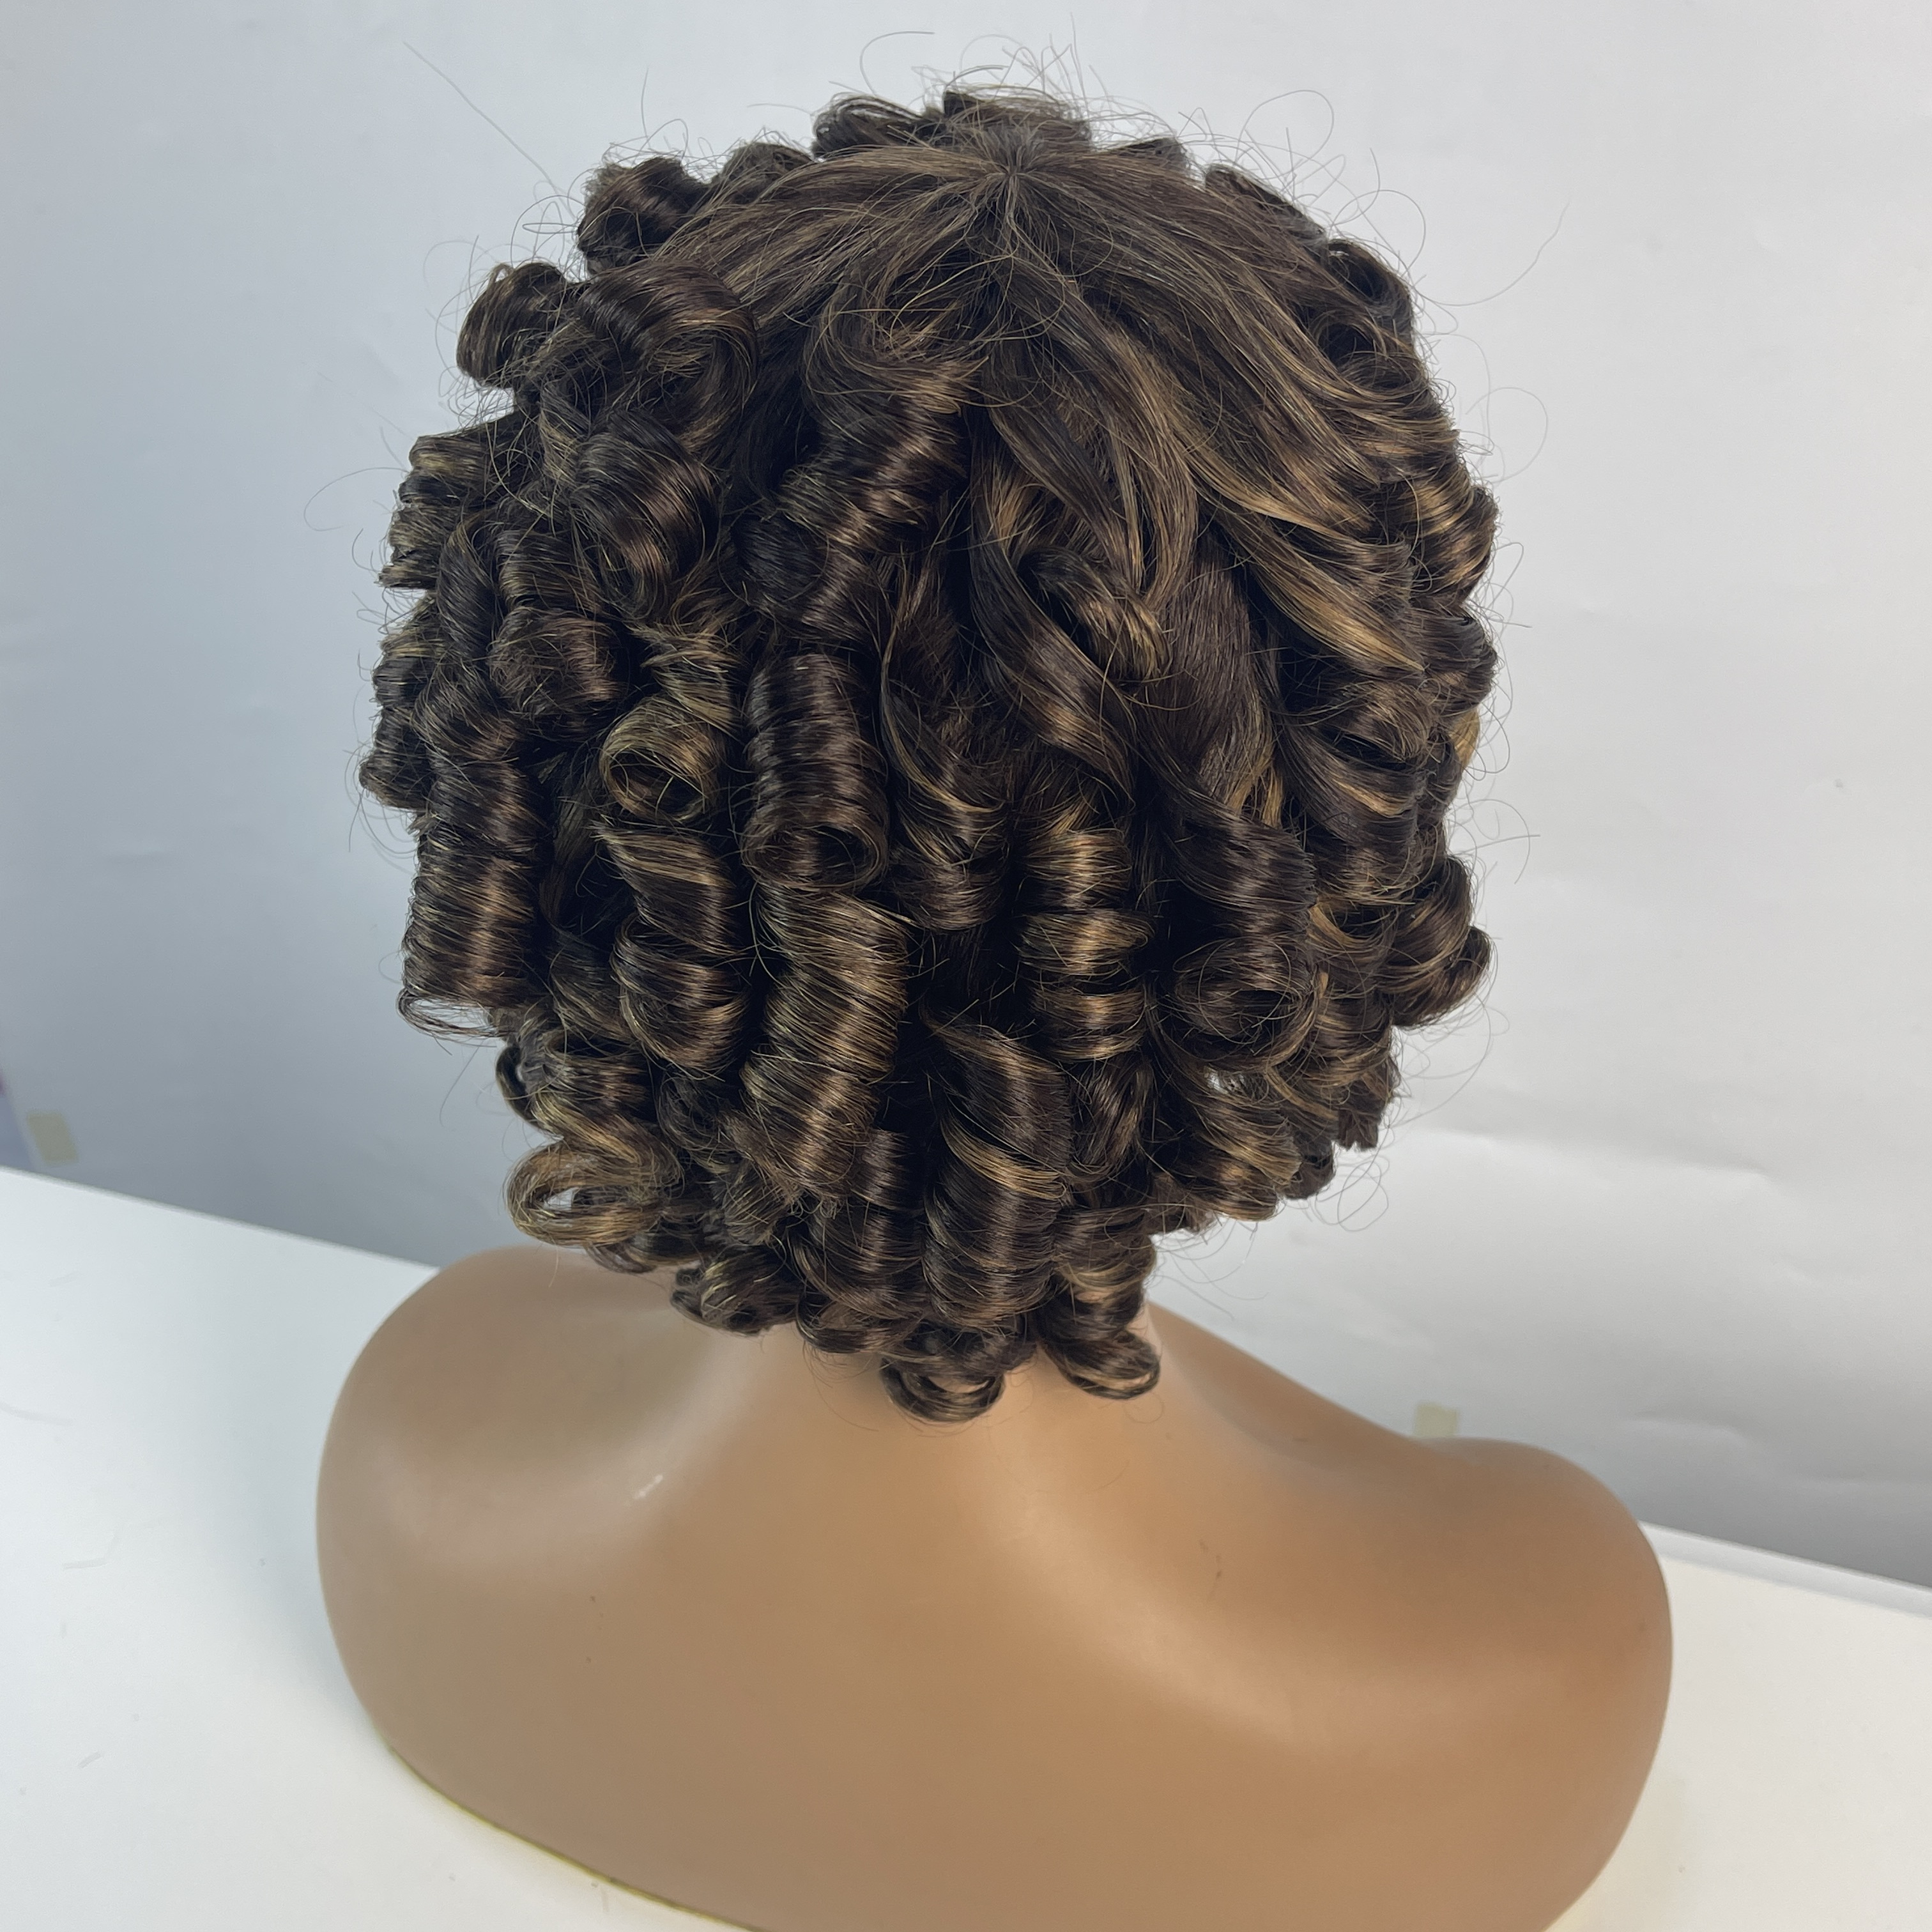 Short Curly Wig for Black Women with Bangs Bouncy Fluffy Kinky Curly Human Hair 2 Tone Ombre Darkest Brown Short Curly Afro Wig